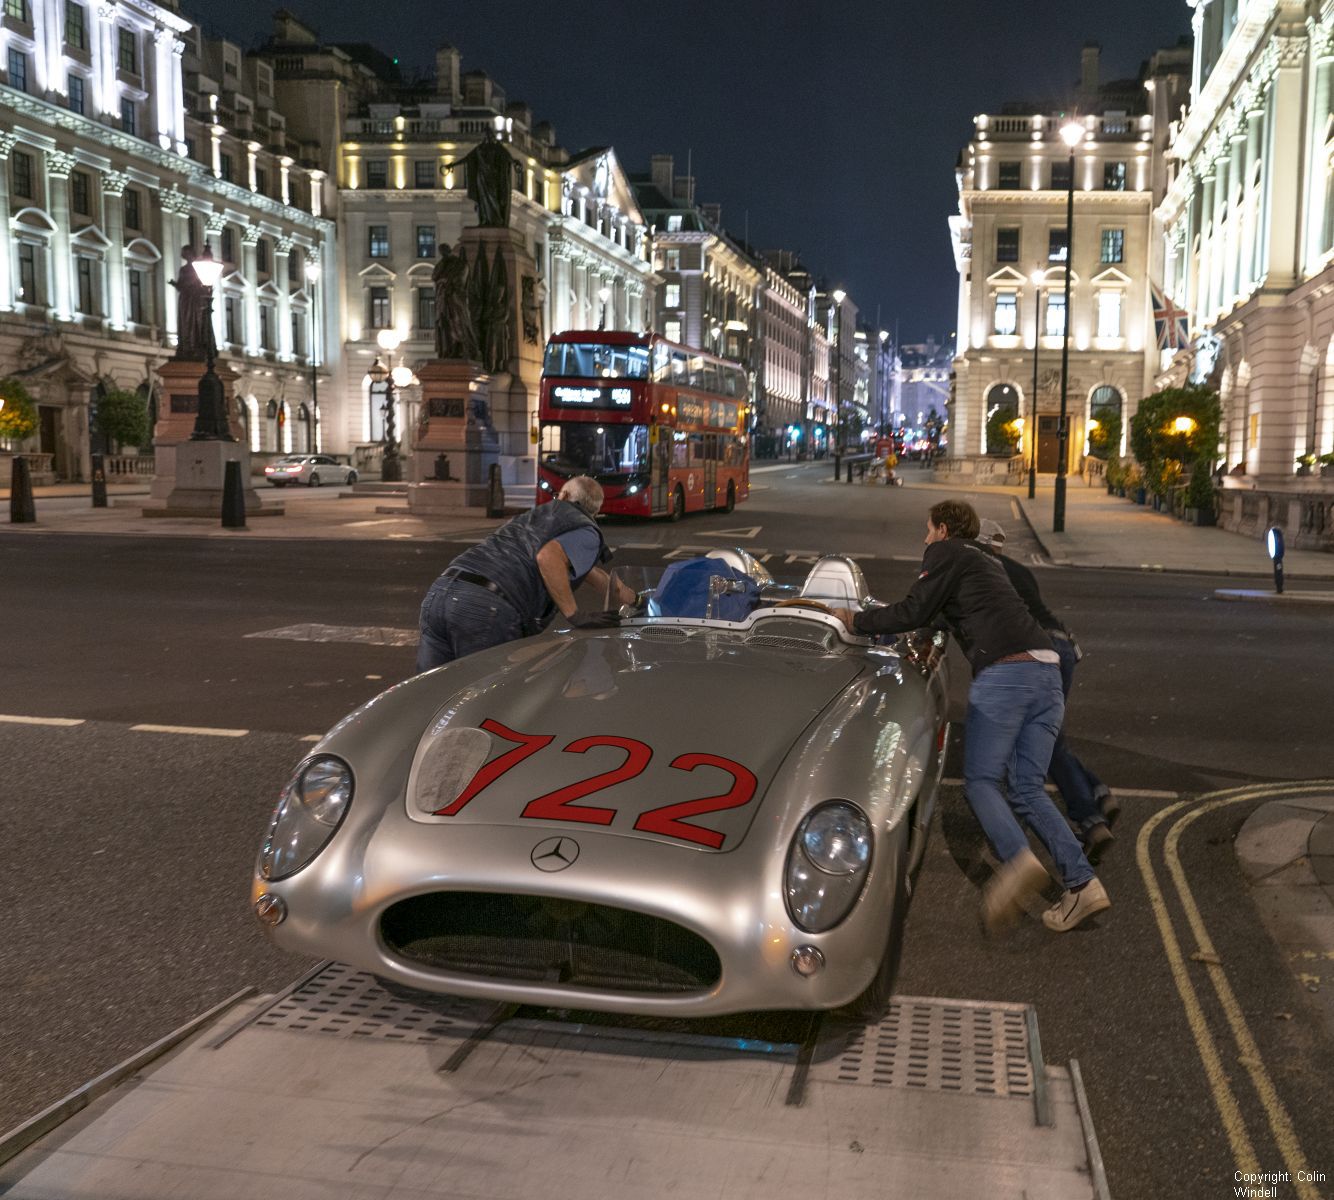 Colin-on-Cars - Special tribute to Stirling Moss